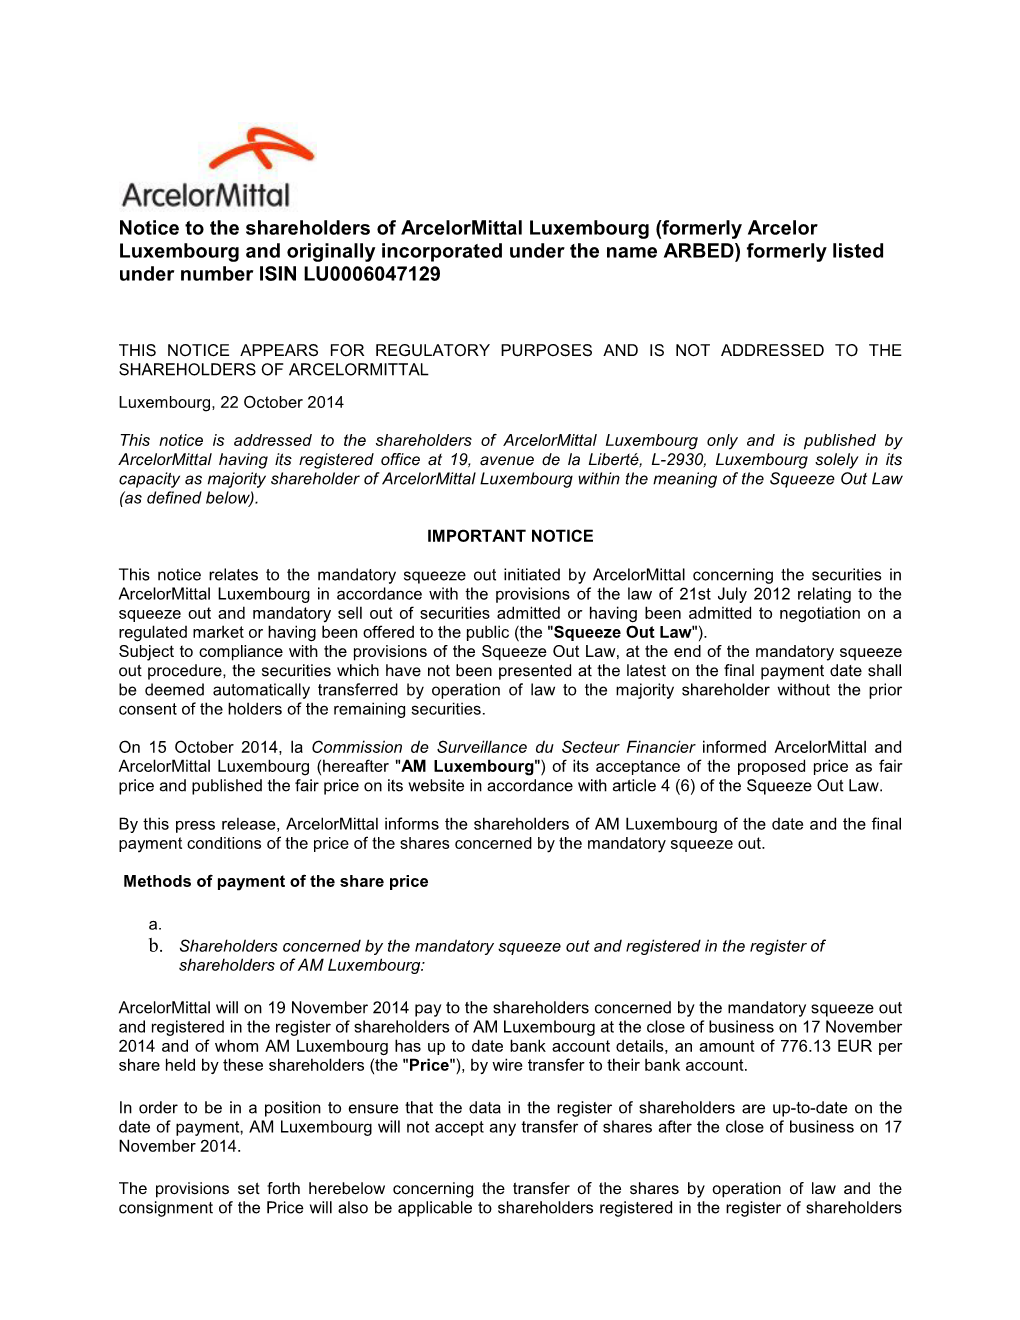 Notice to the Shareholders of Arcelormittal Luxembourg (Formerly